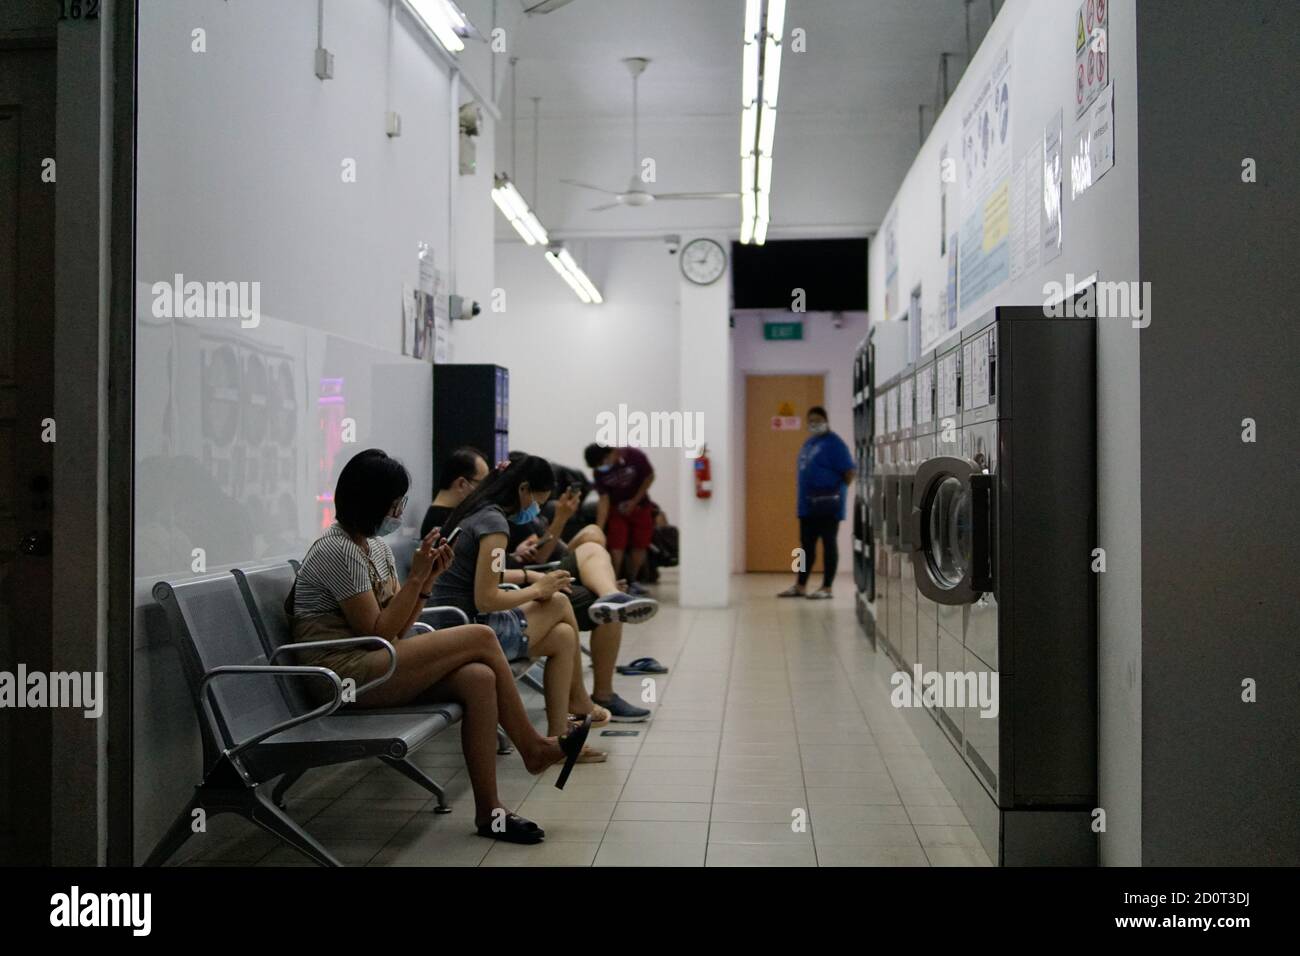 Evening scene at a launderette in Geylang, Singapore Stock Photo